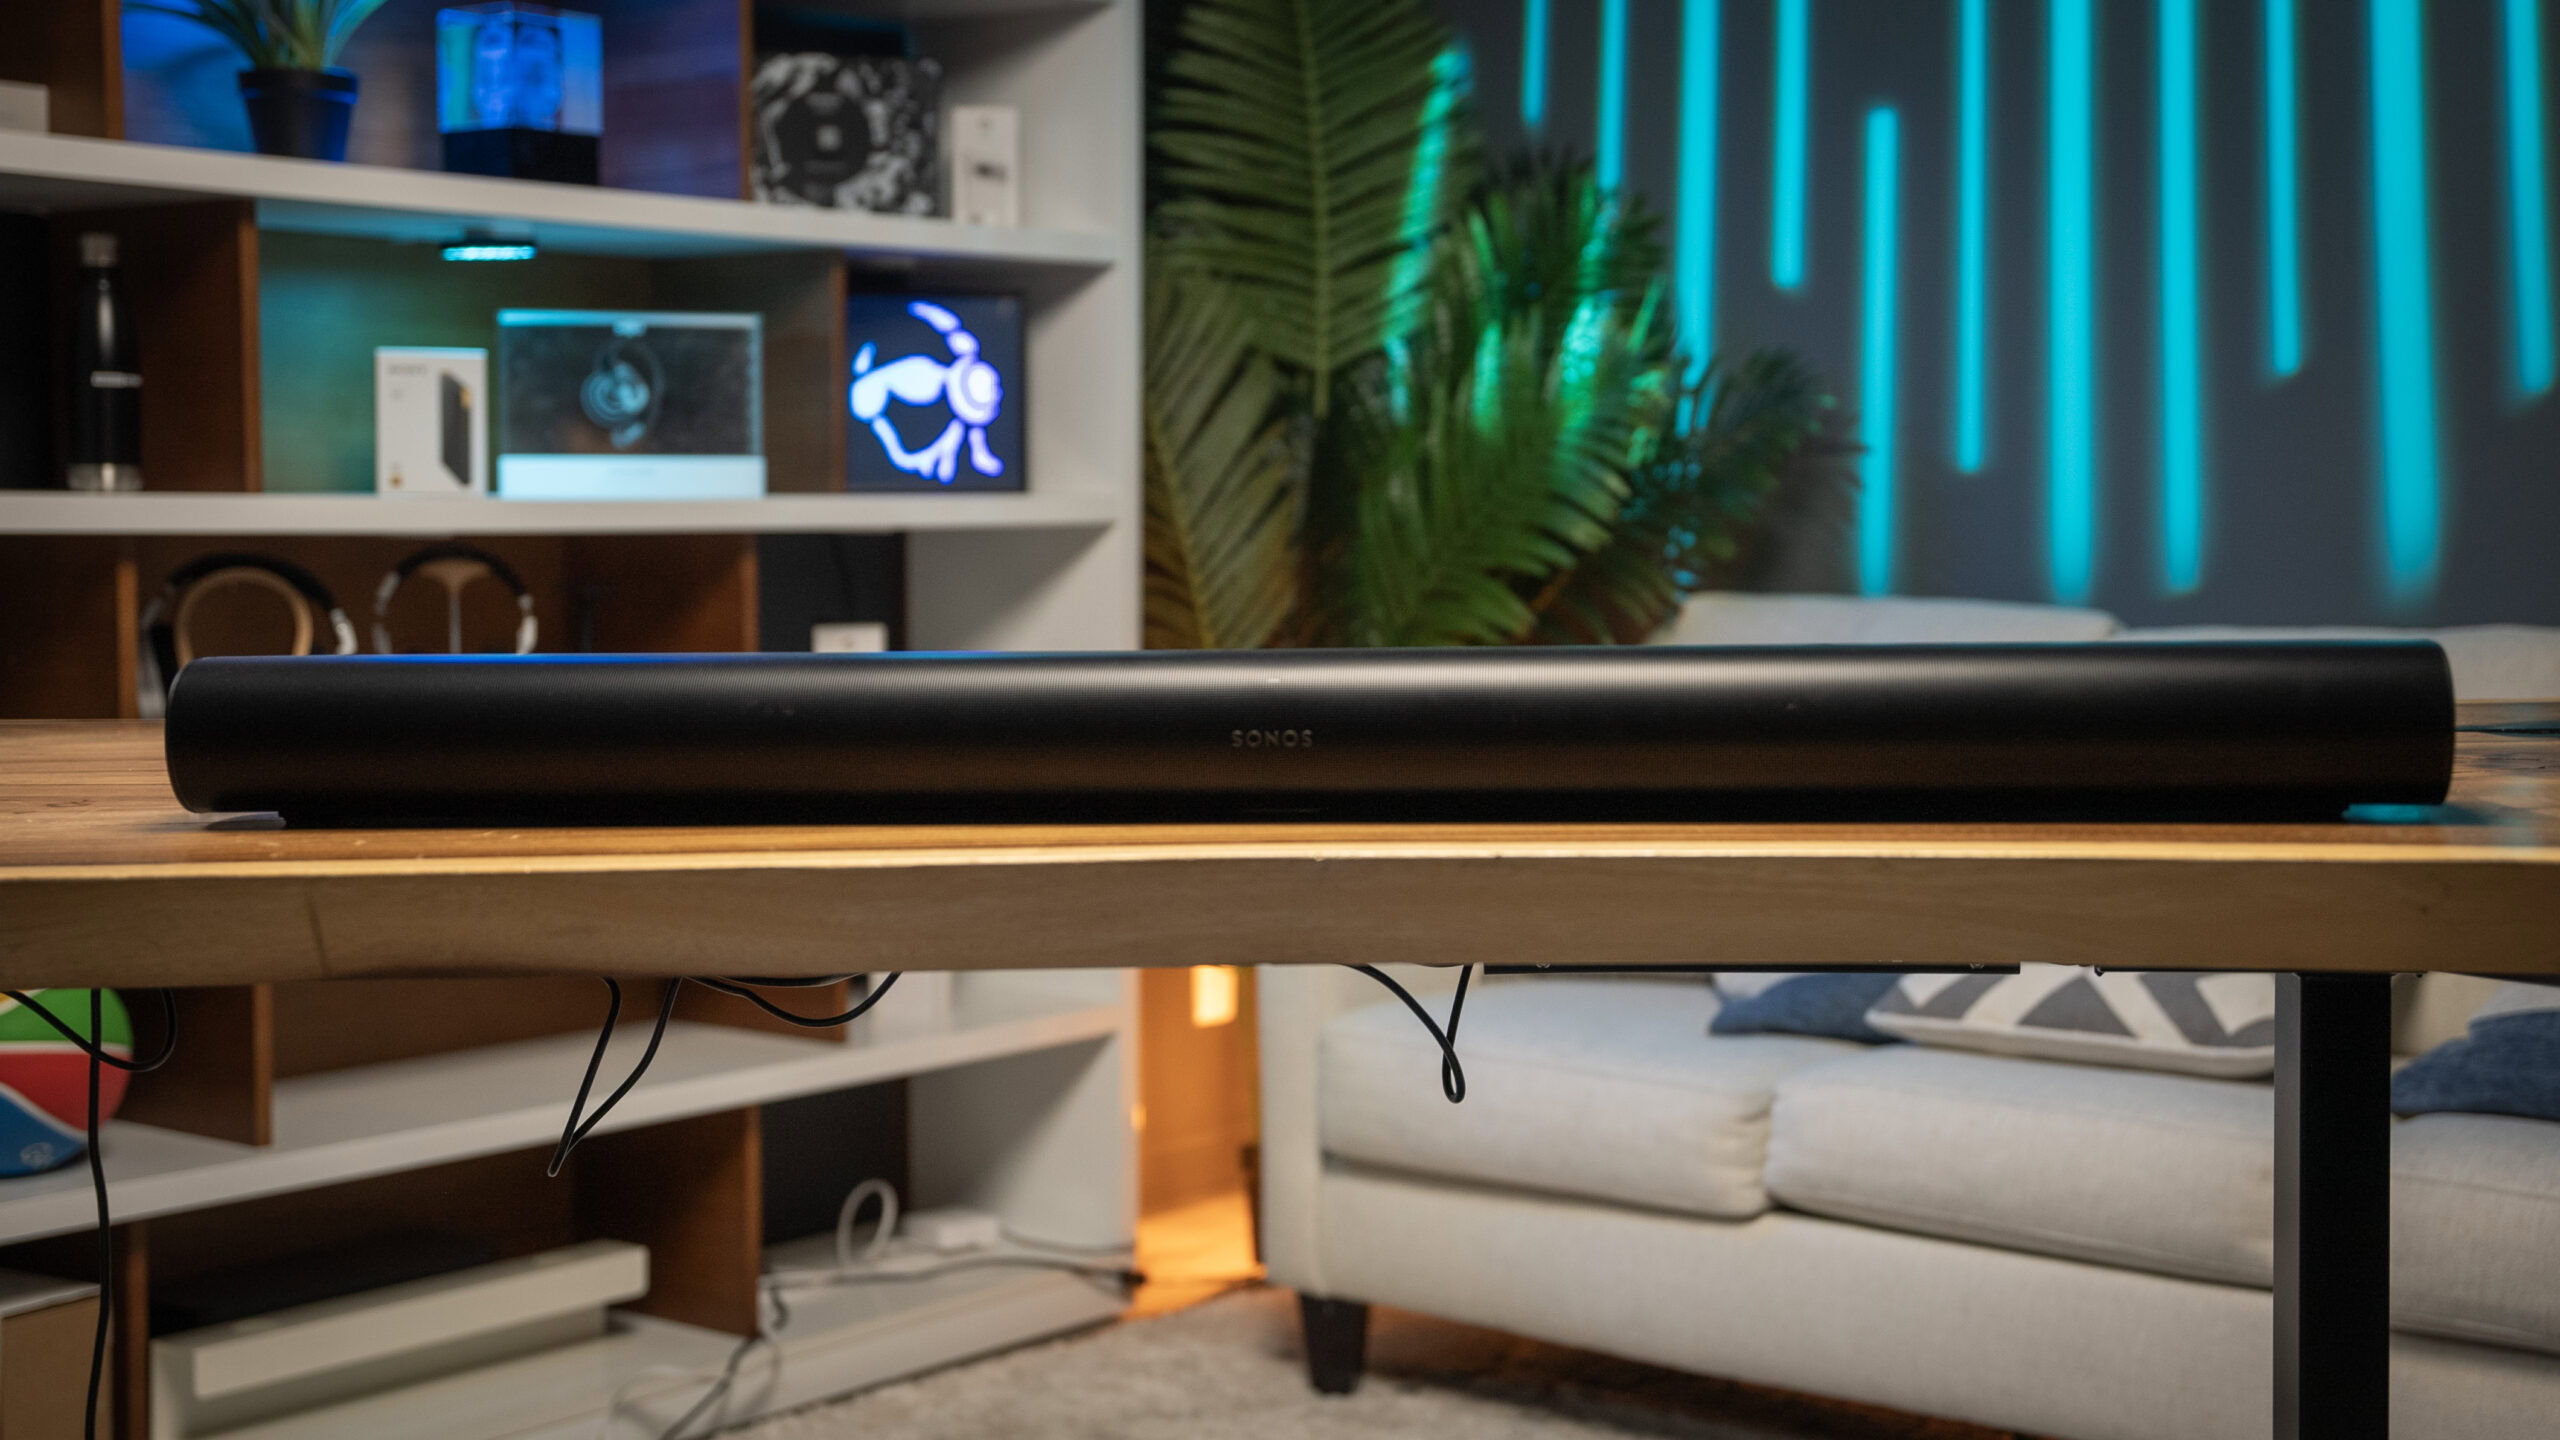 The Sonos Arc soundbar is placed on a wooden table in the middle of a brightly-colored studio setup.